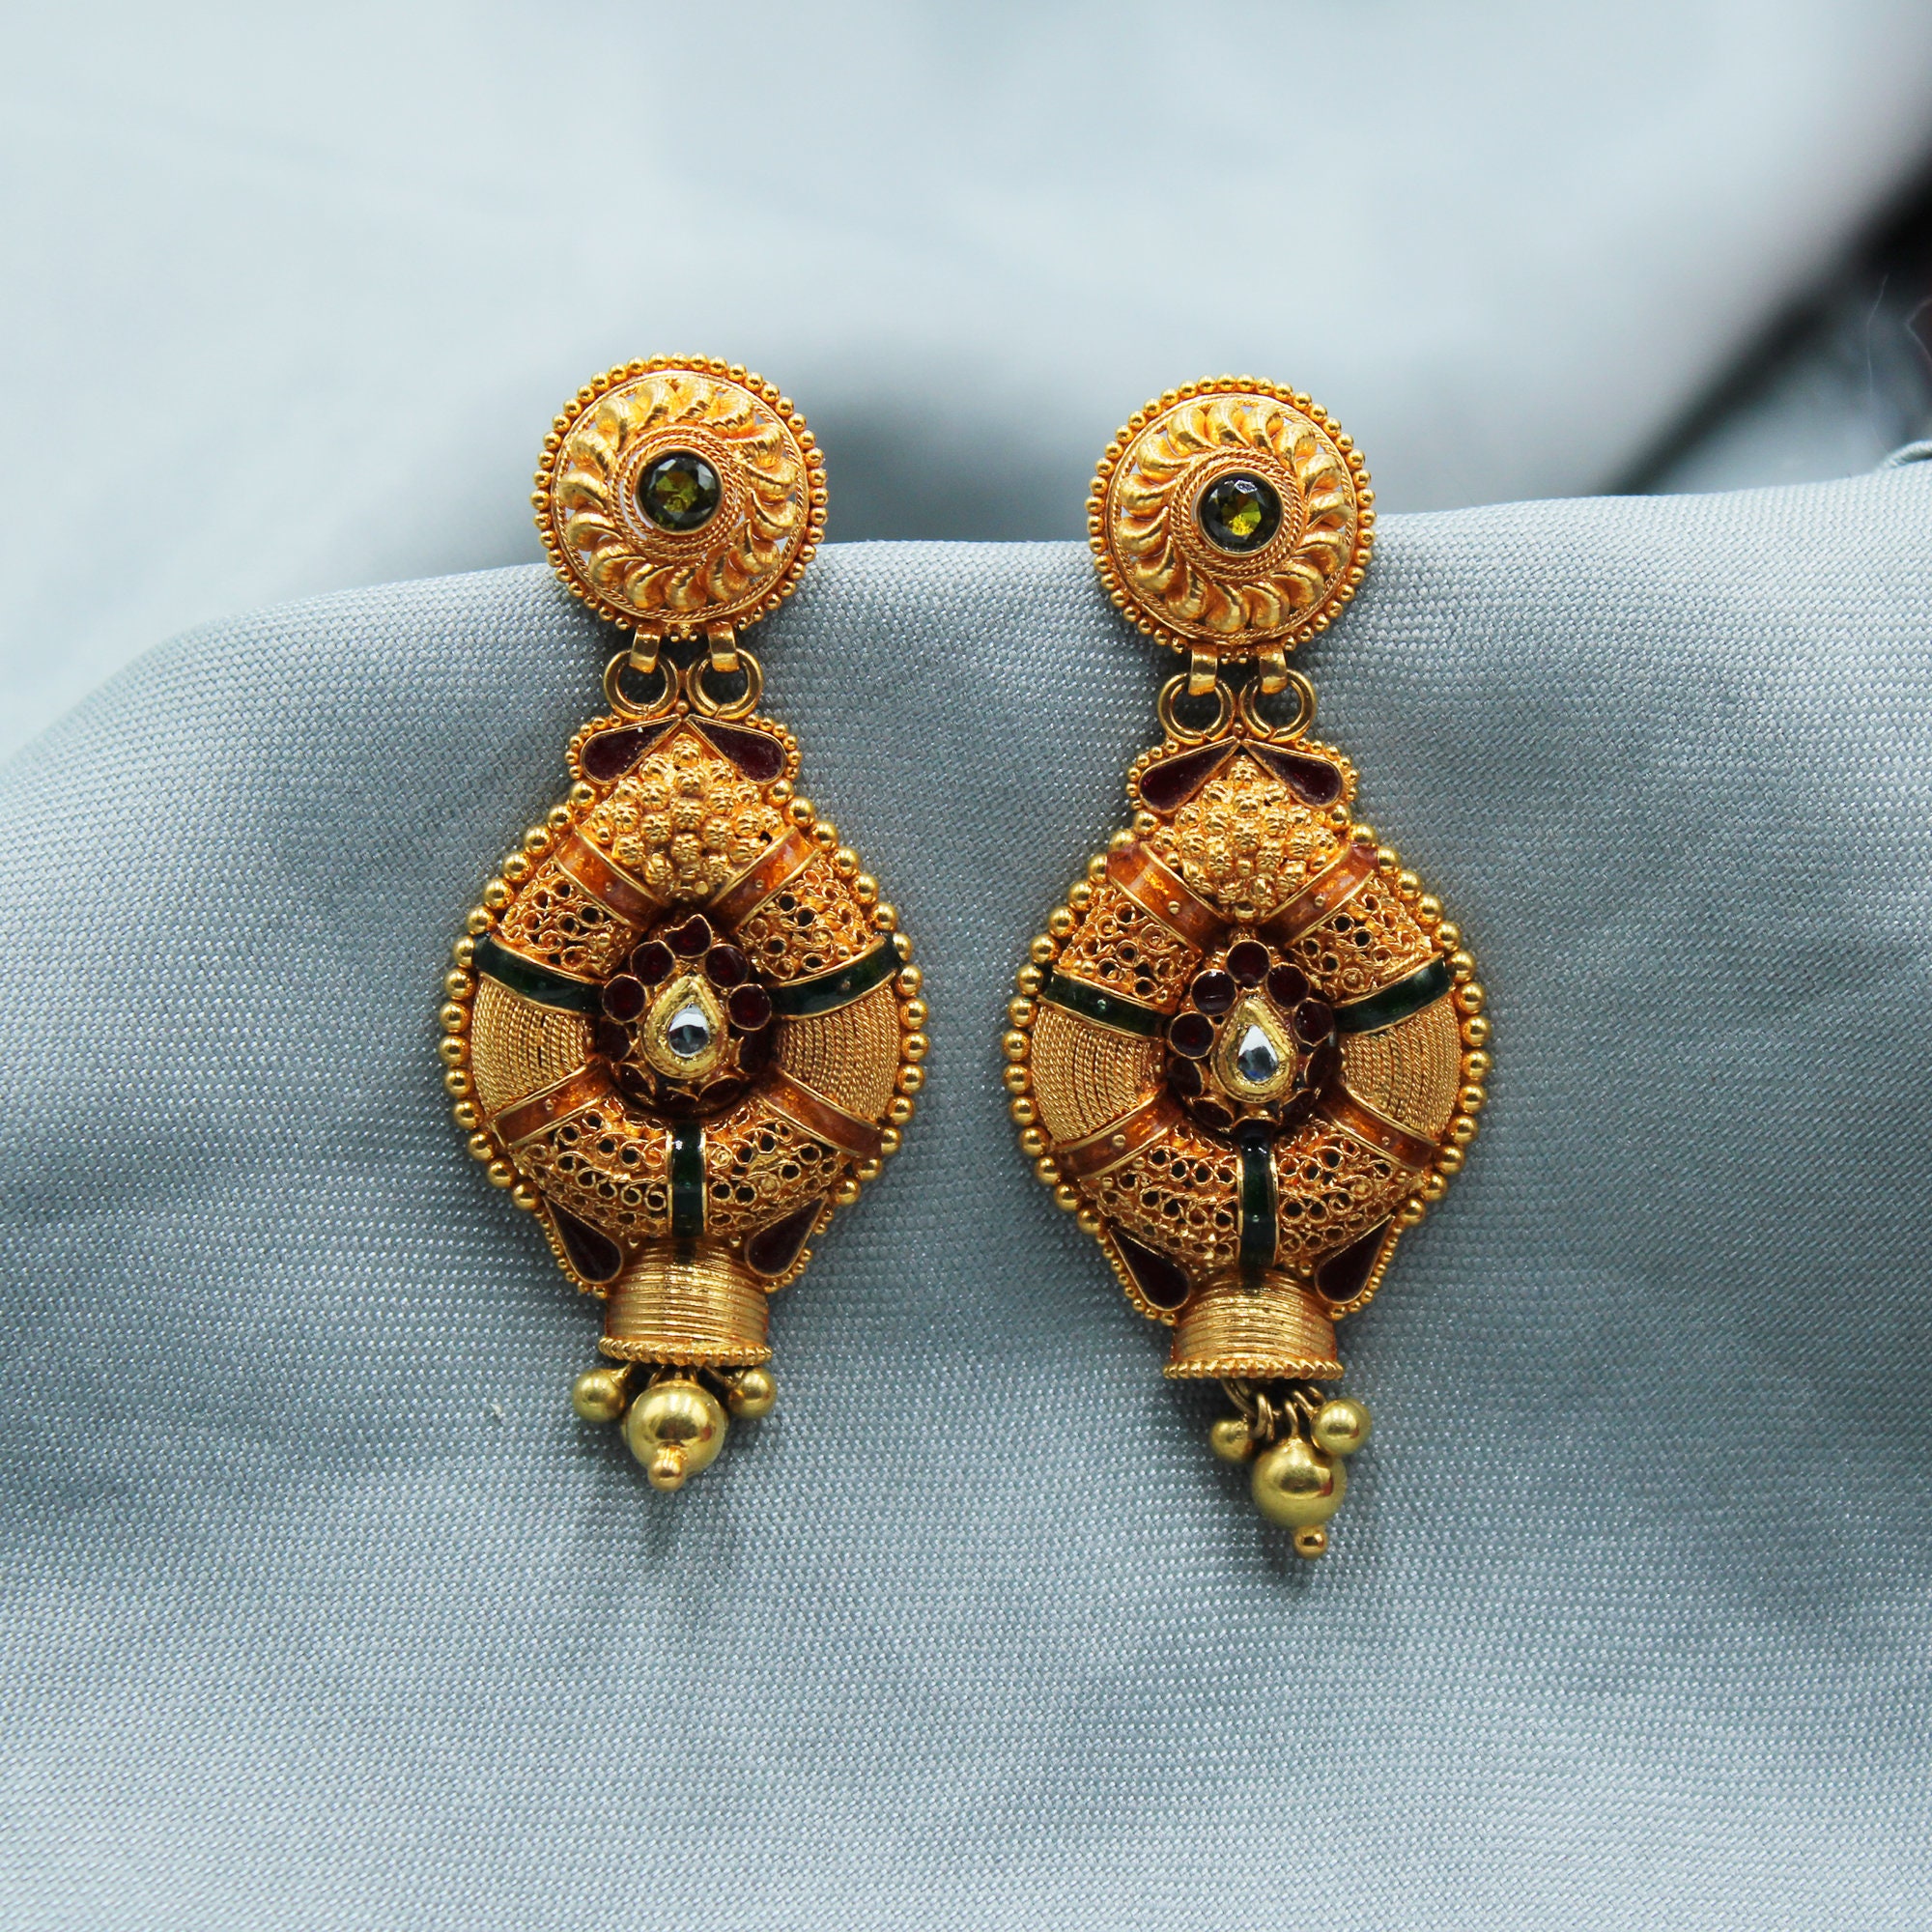 6 Best Gold Earrings Collections - People choice